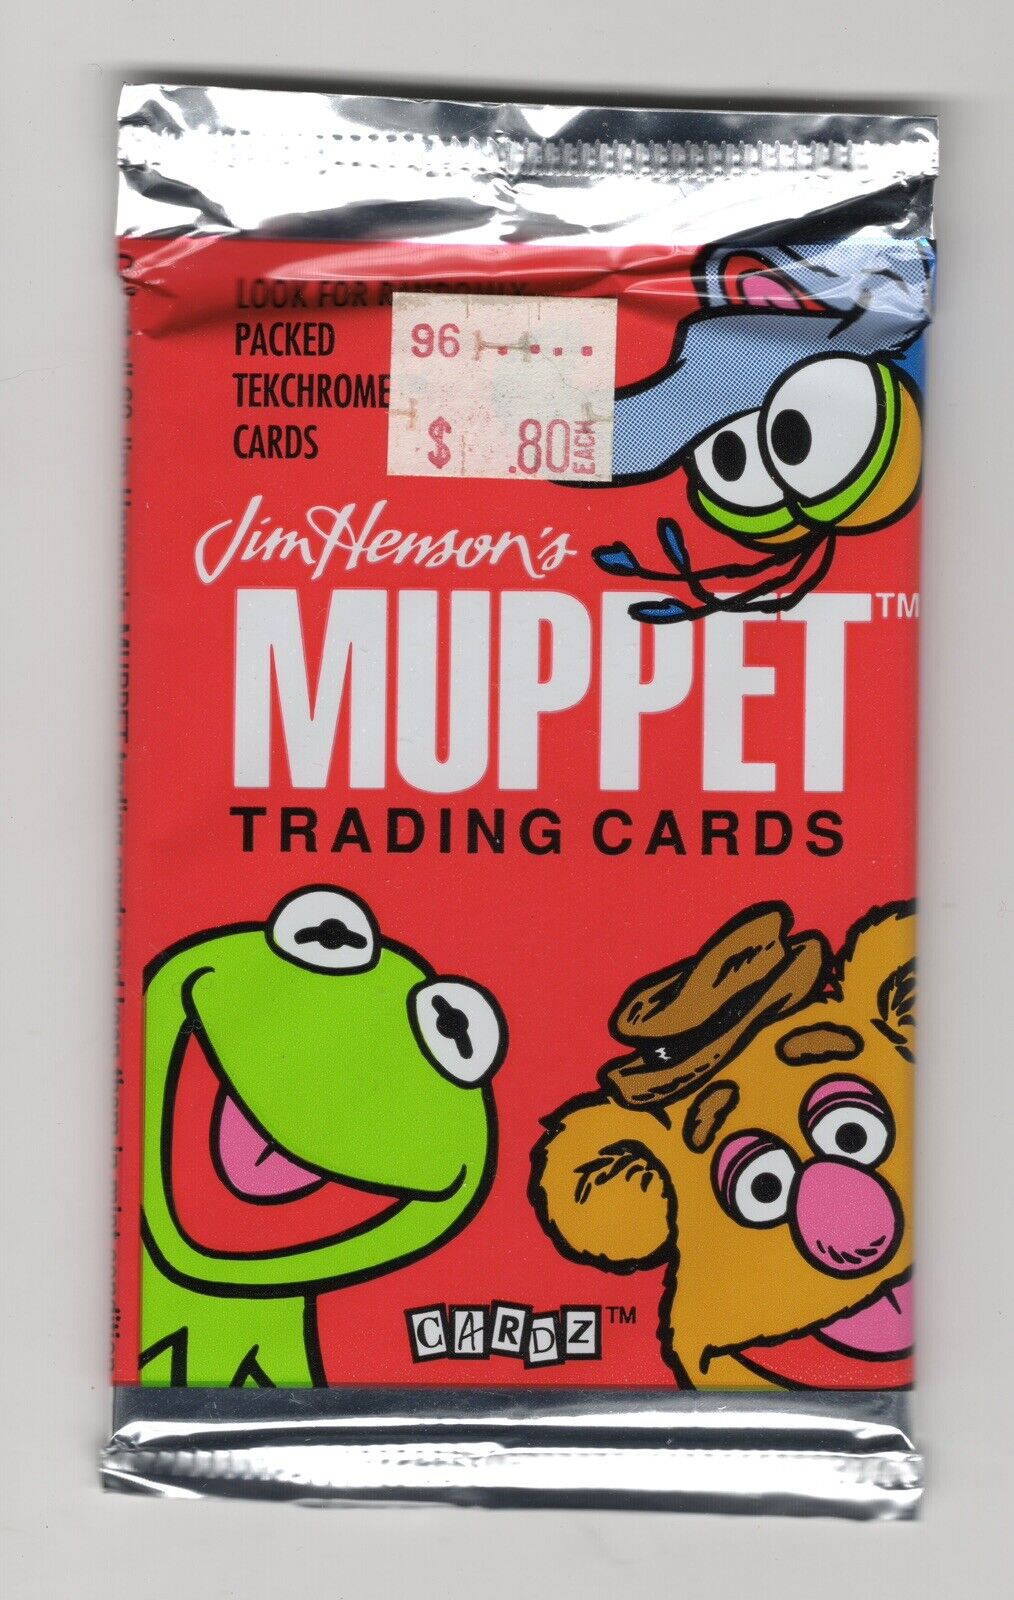 1993 Jim Henson’s Muppet Trading Cards 1 Factory Sealed Pack By CARDZ